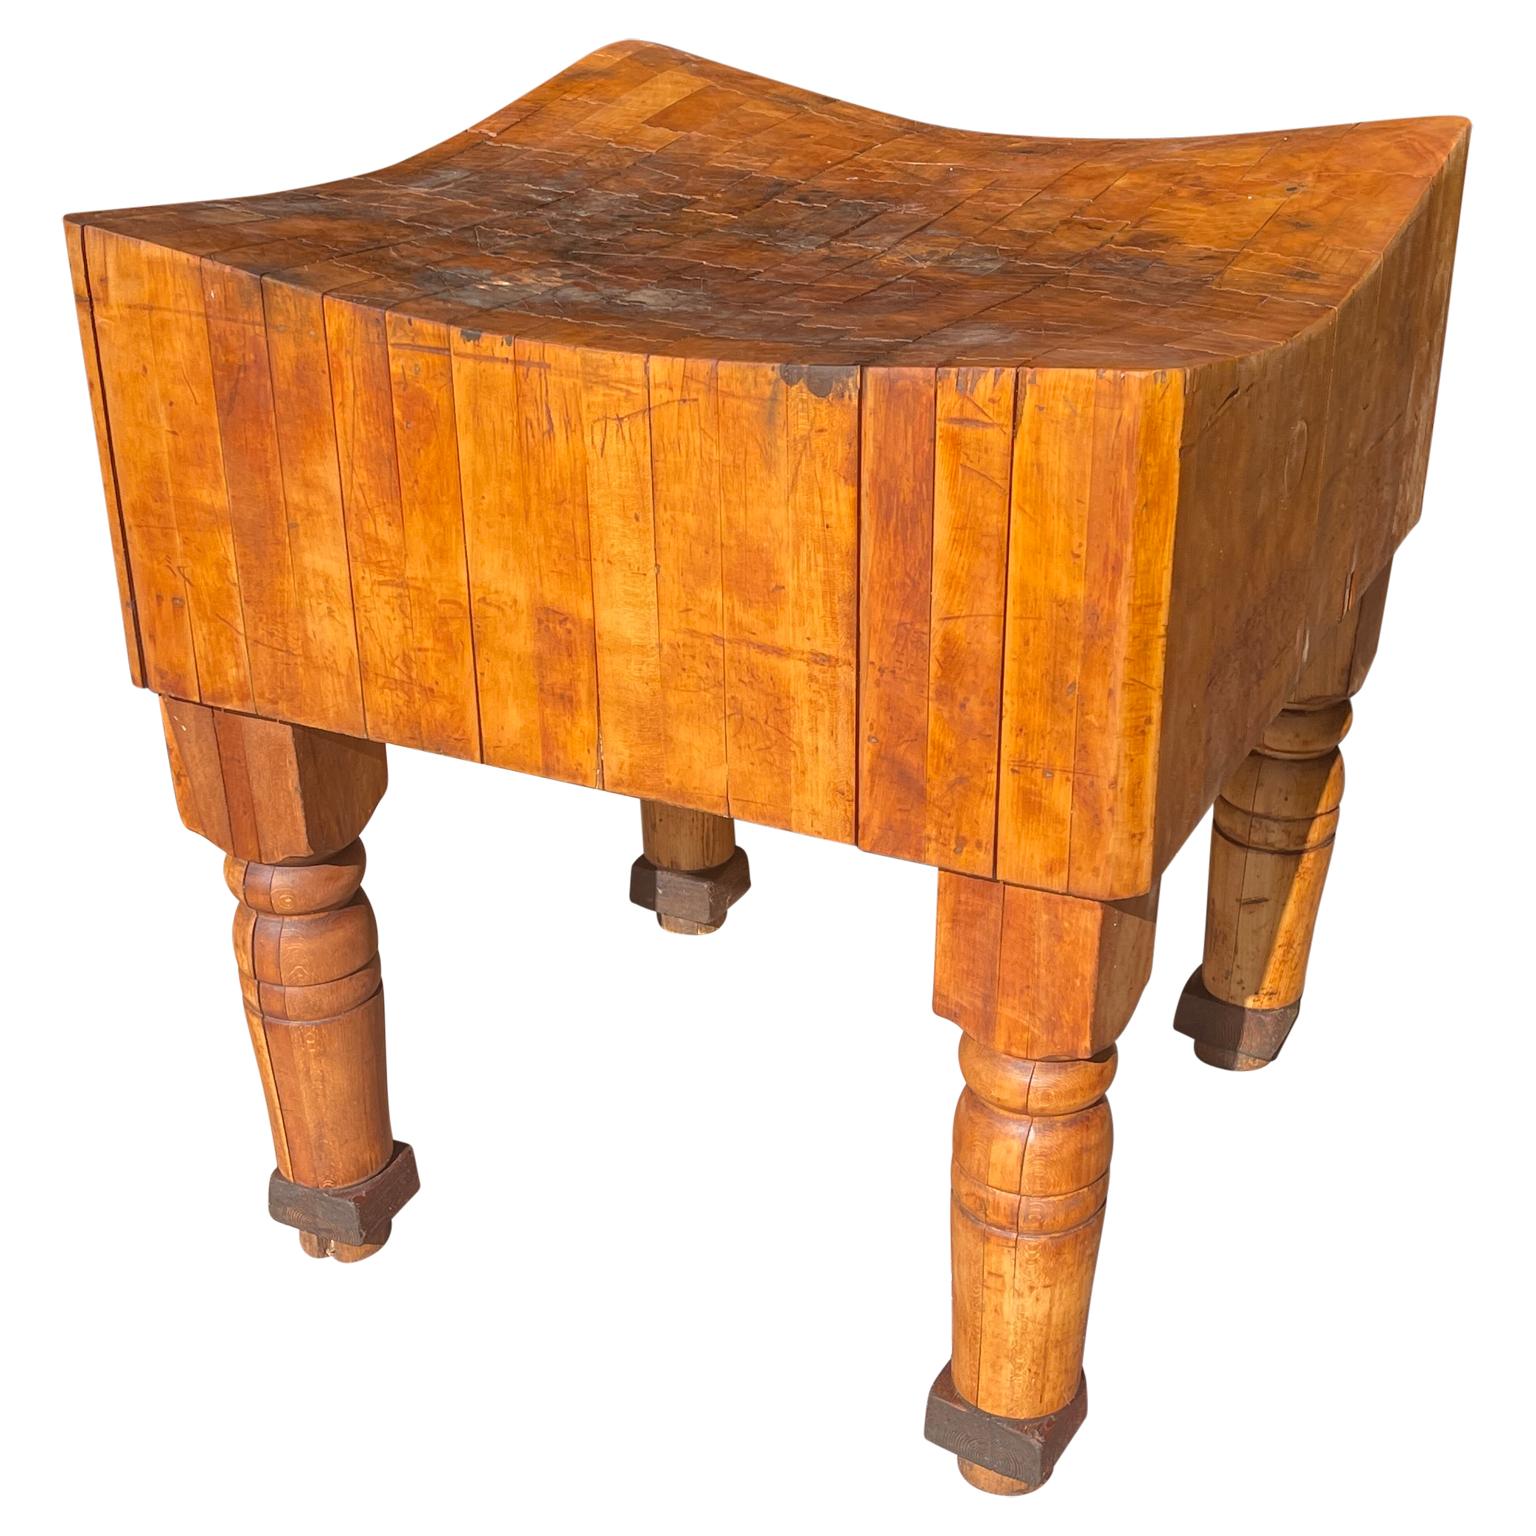 Large Mid-Century Modern large butcher block. This incredible butcher block has a beautiful aged patina. The aged maple wood is glowing with it's history of use and character. The tall sturdy legs and undulated surface make this piece a work of